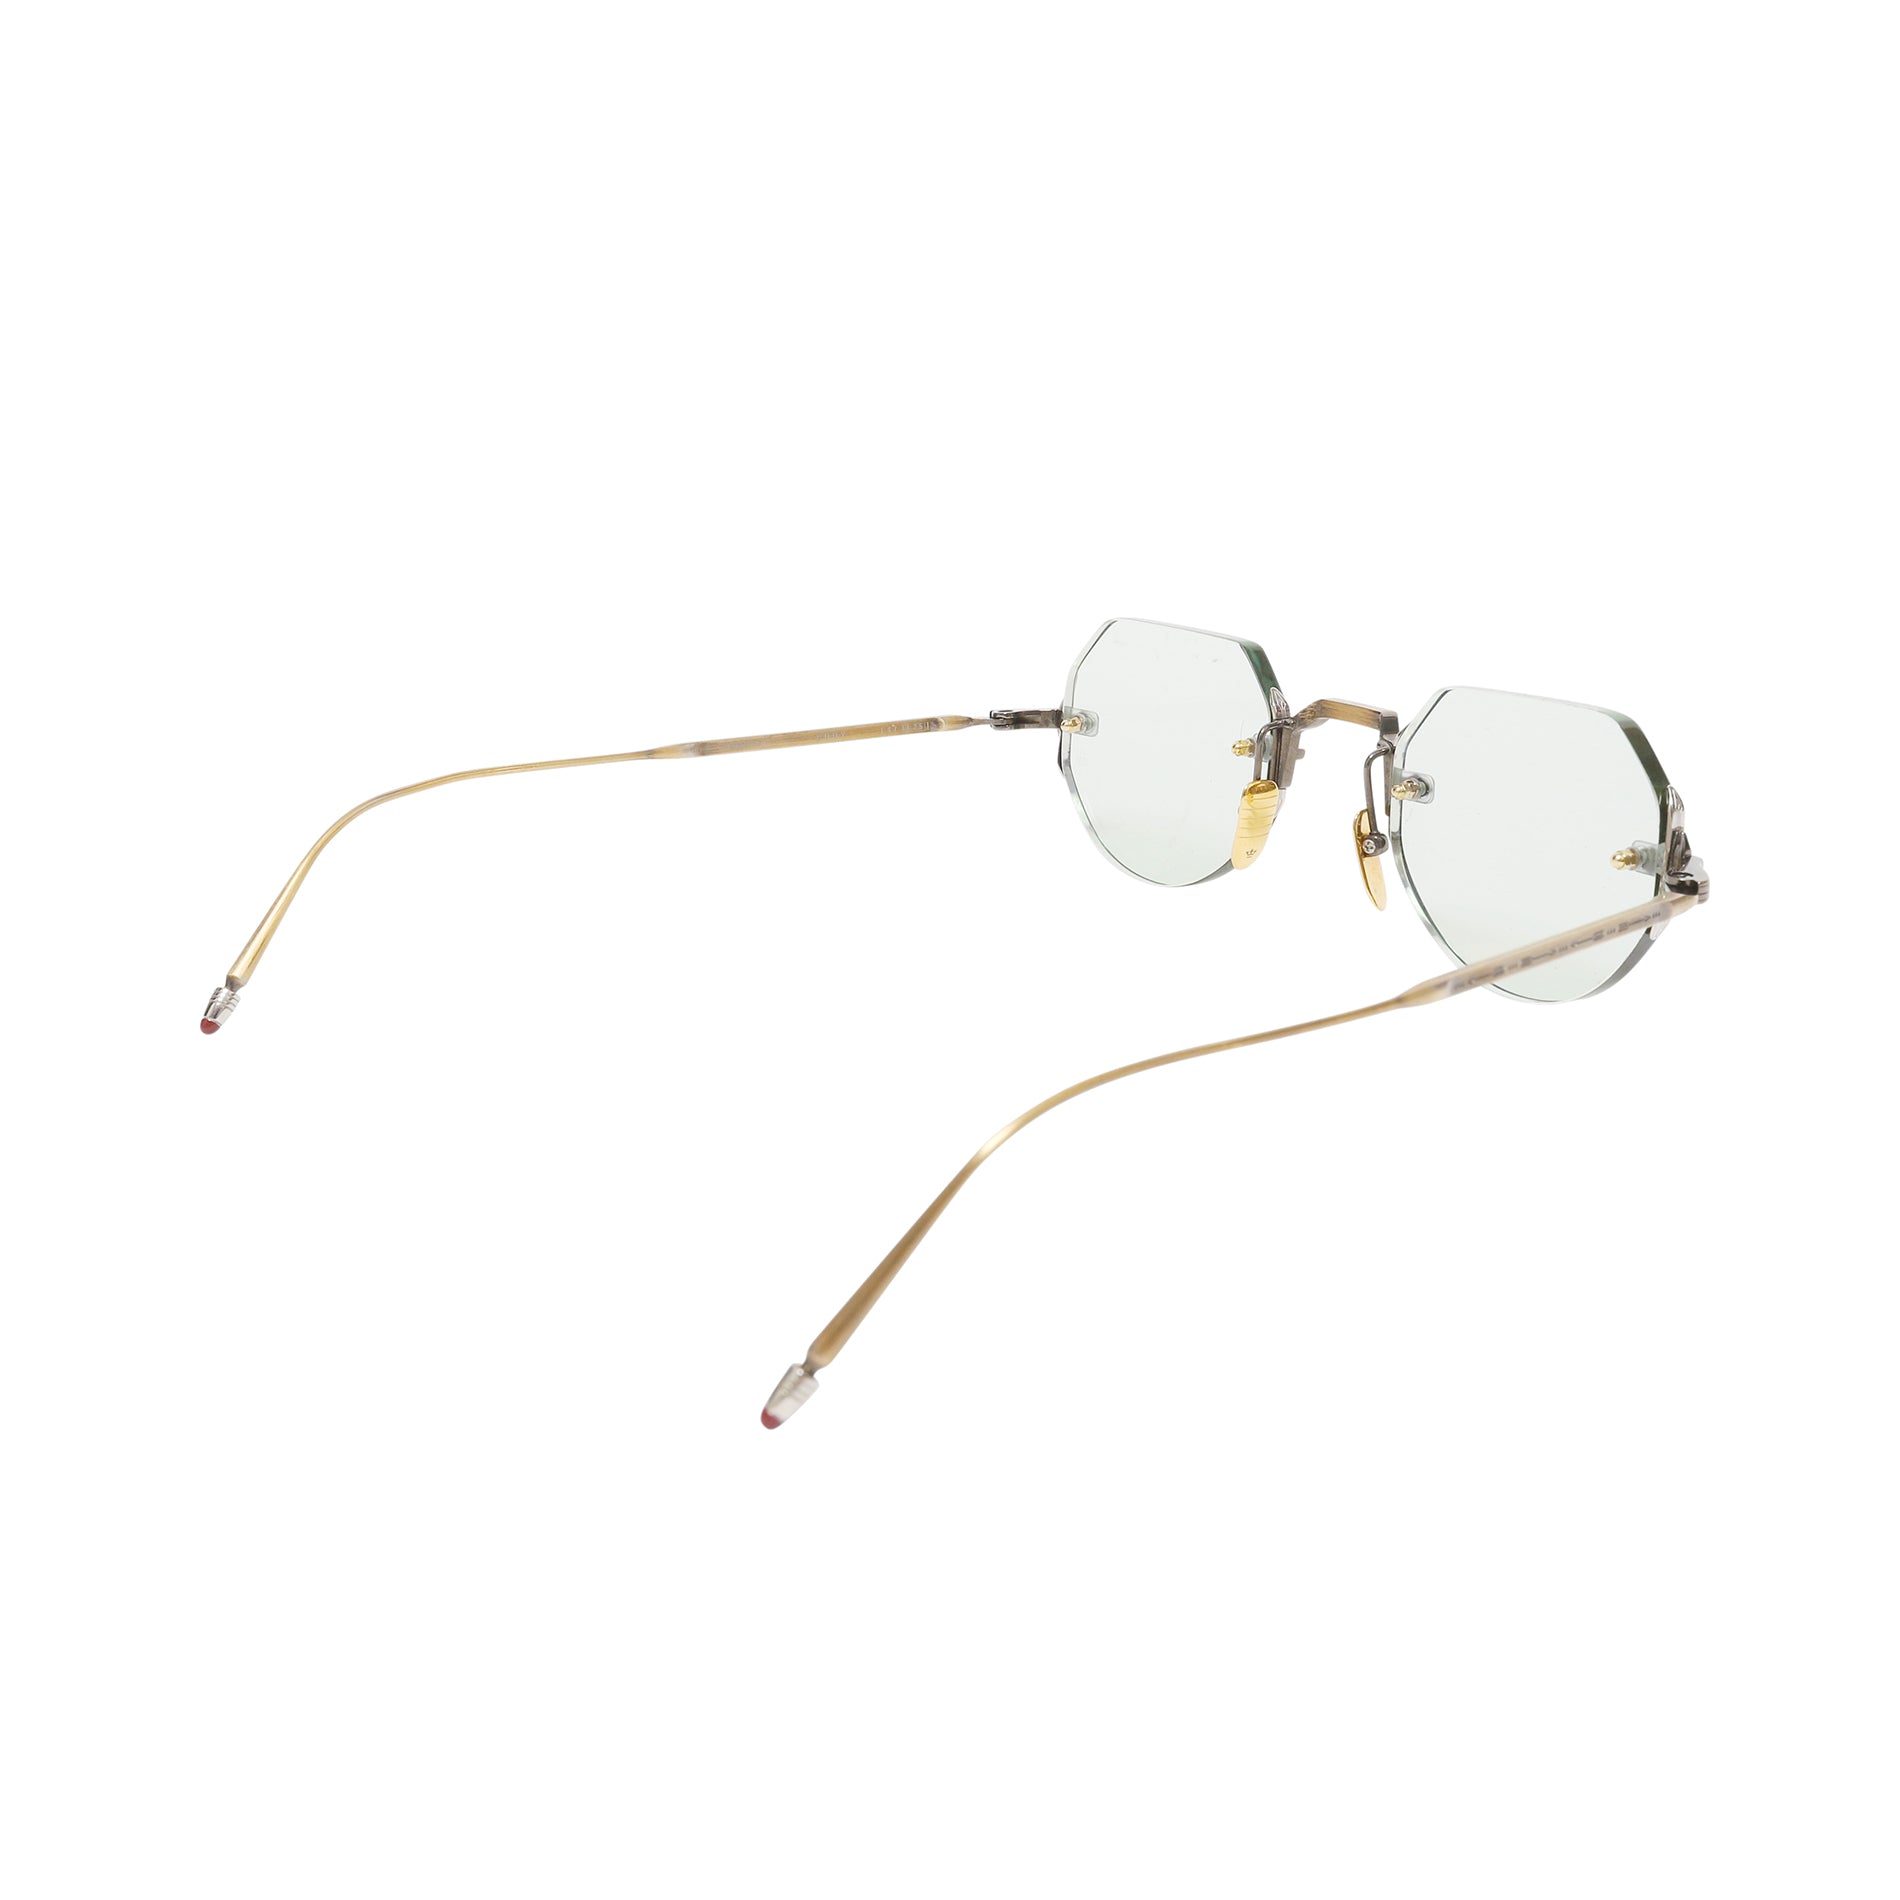 Jacques Marie Mage Cody Sunglasses